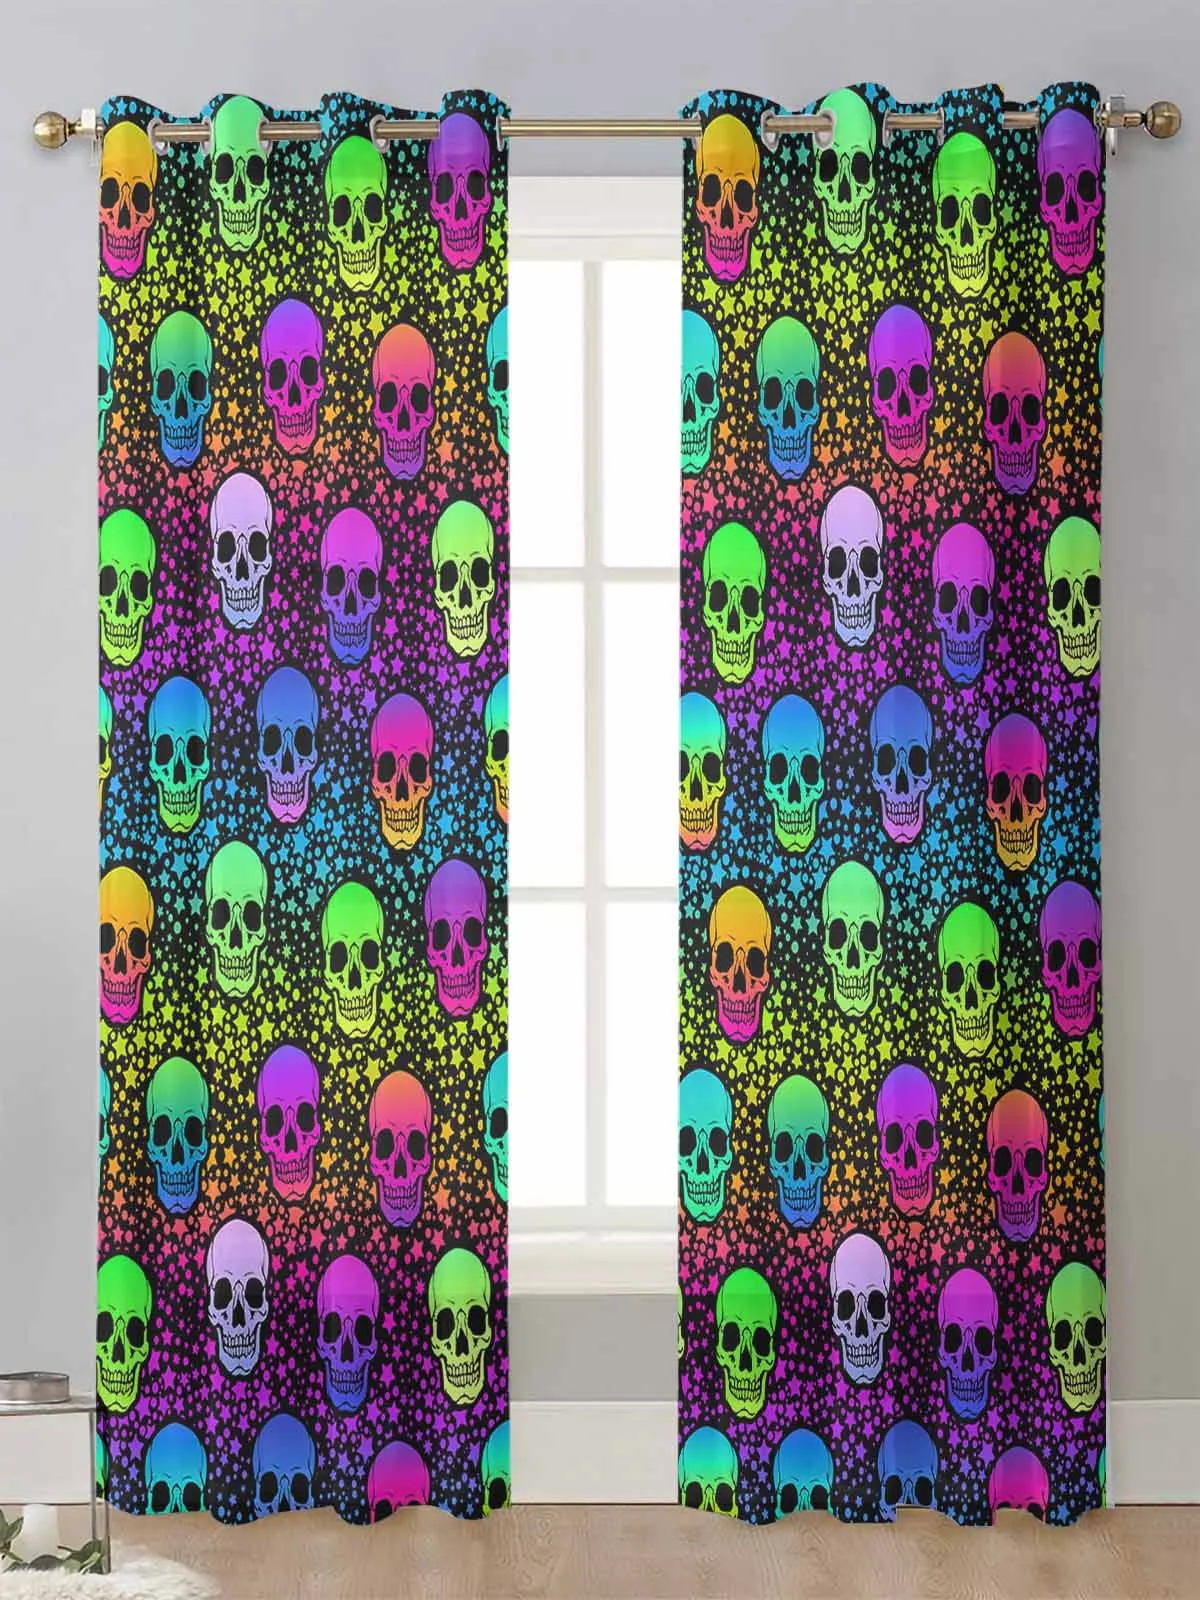 

Rainbow Colored Skull Stars Sheer Curtains For Living Room Window Transparent Voile Tulle Curtain Cortinas Drapes Home Decor